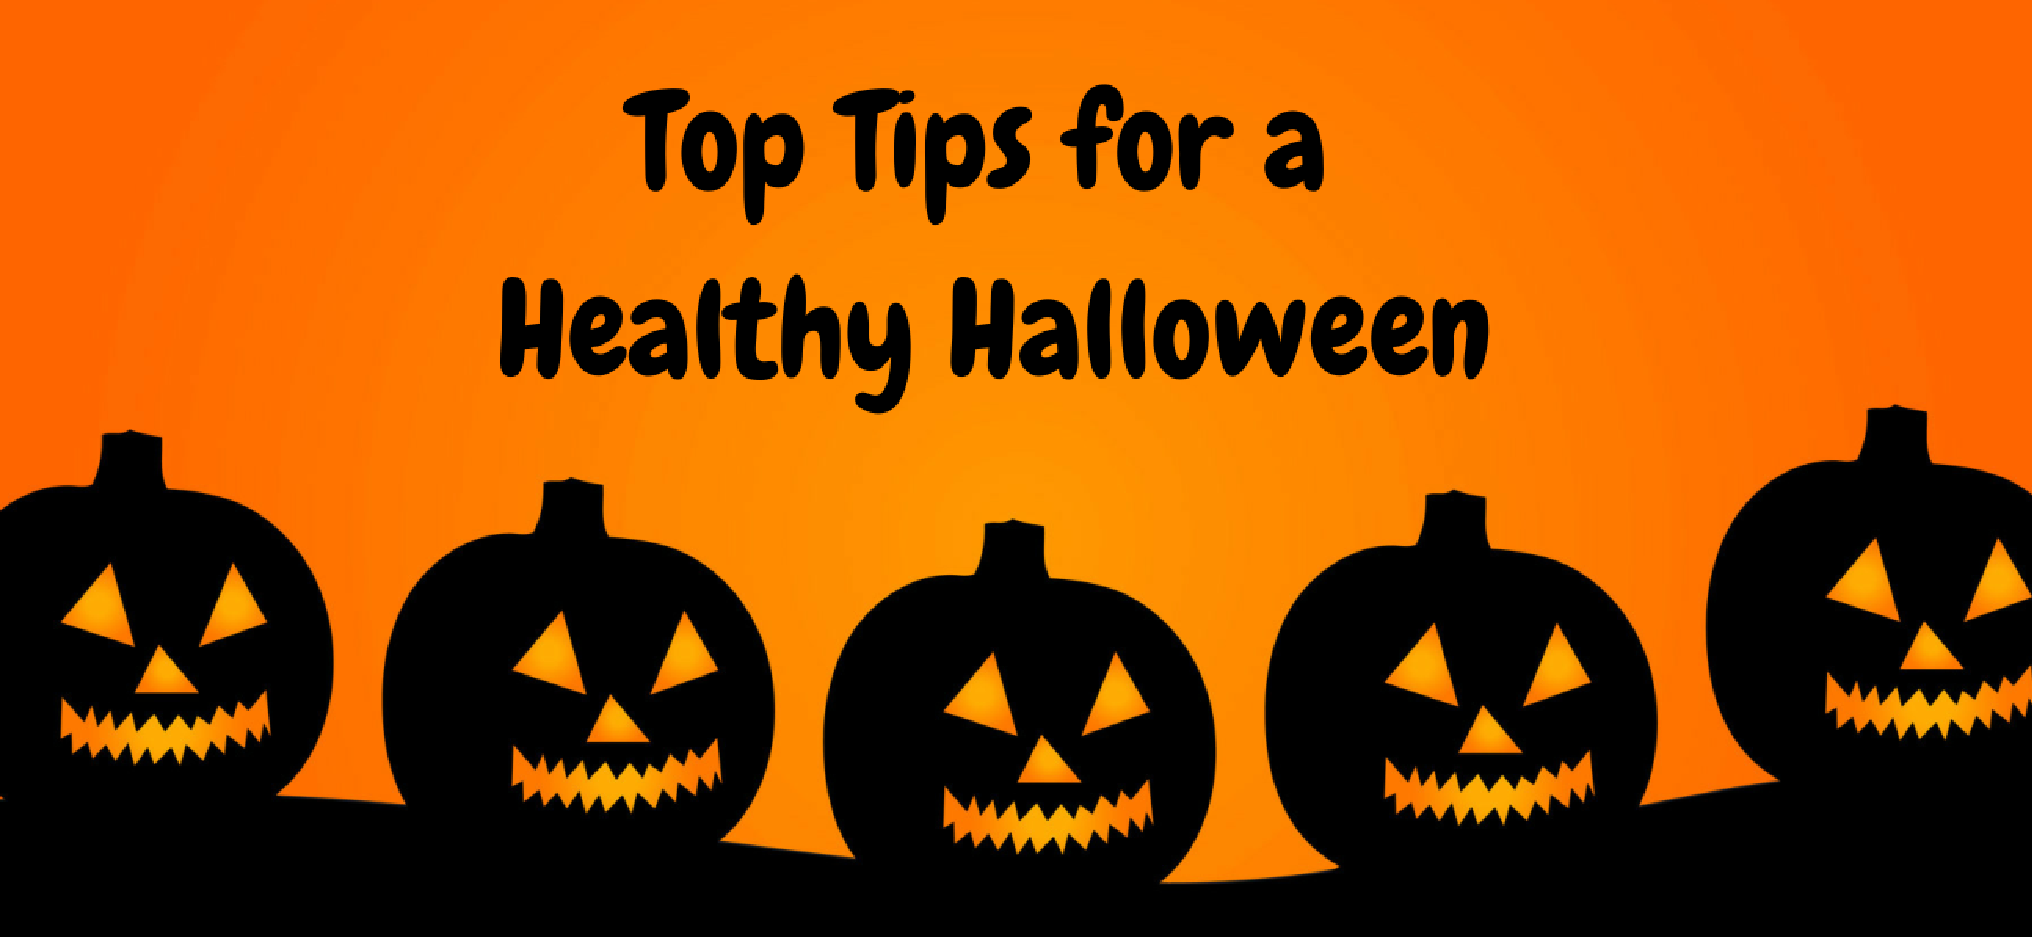 "Top Tips for a Healthy Halloween" written over an image of Jack-O-Lanterns on a hill